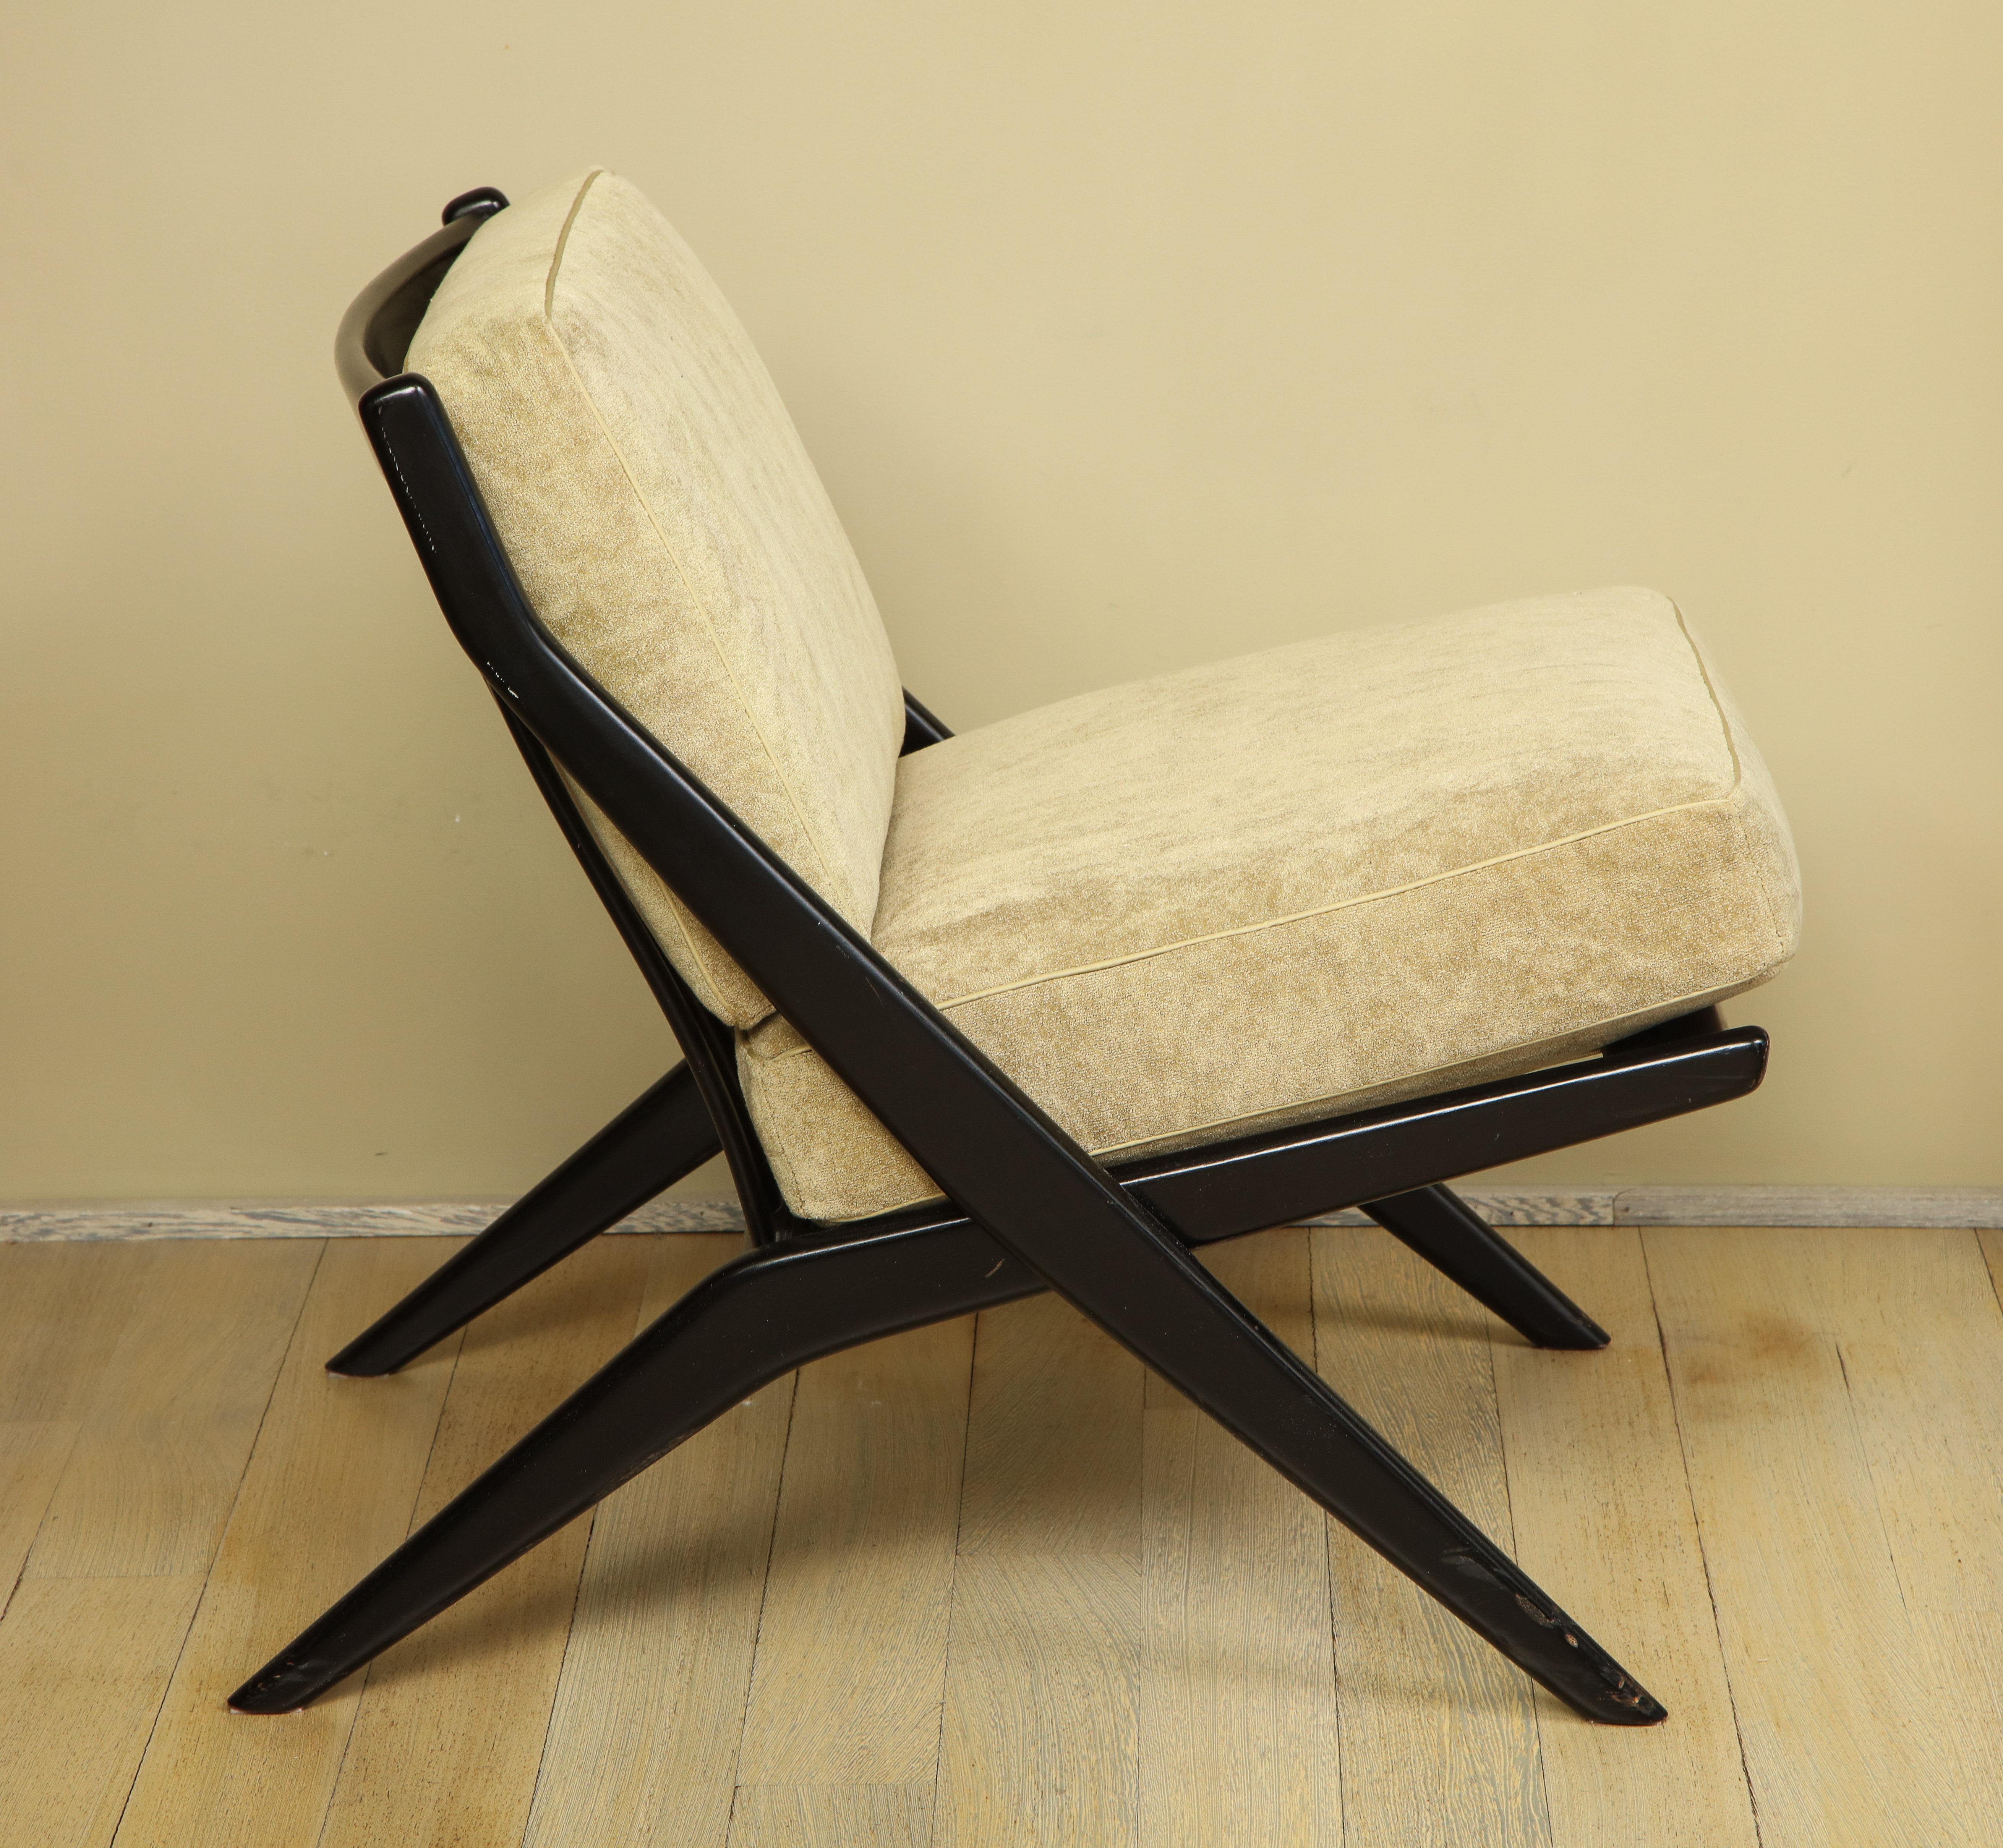 A single Scissor-style slipper chair with ebonized wood frame and removable seat and back cushions.  Made by Folke Ohlsson for Dux.  Sweden, circa 1960. Unsigned. two removable beige upholstered cushions.

Features wood frame with brass metal rod